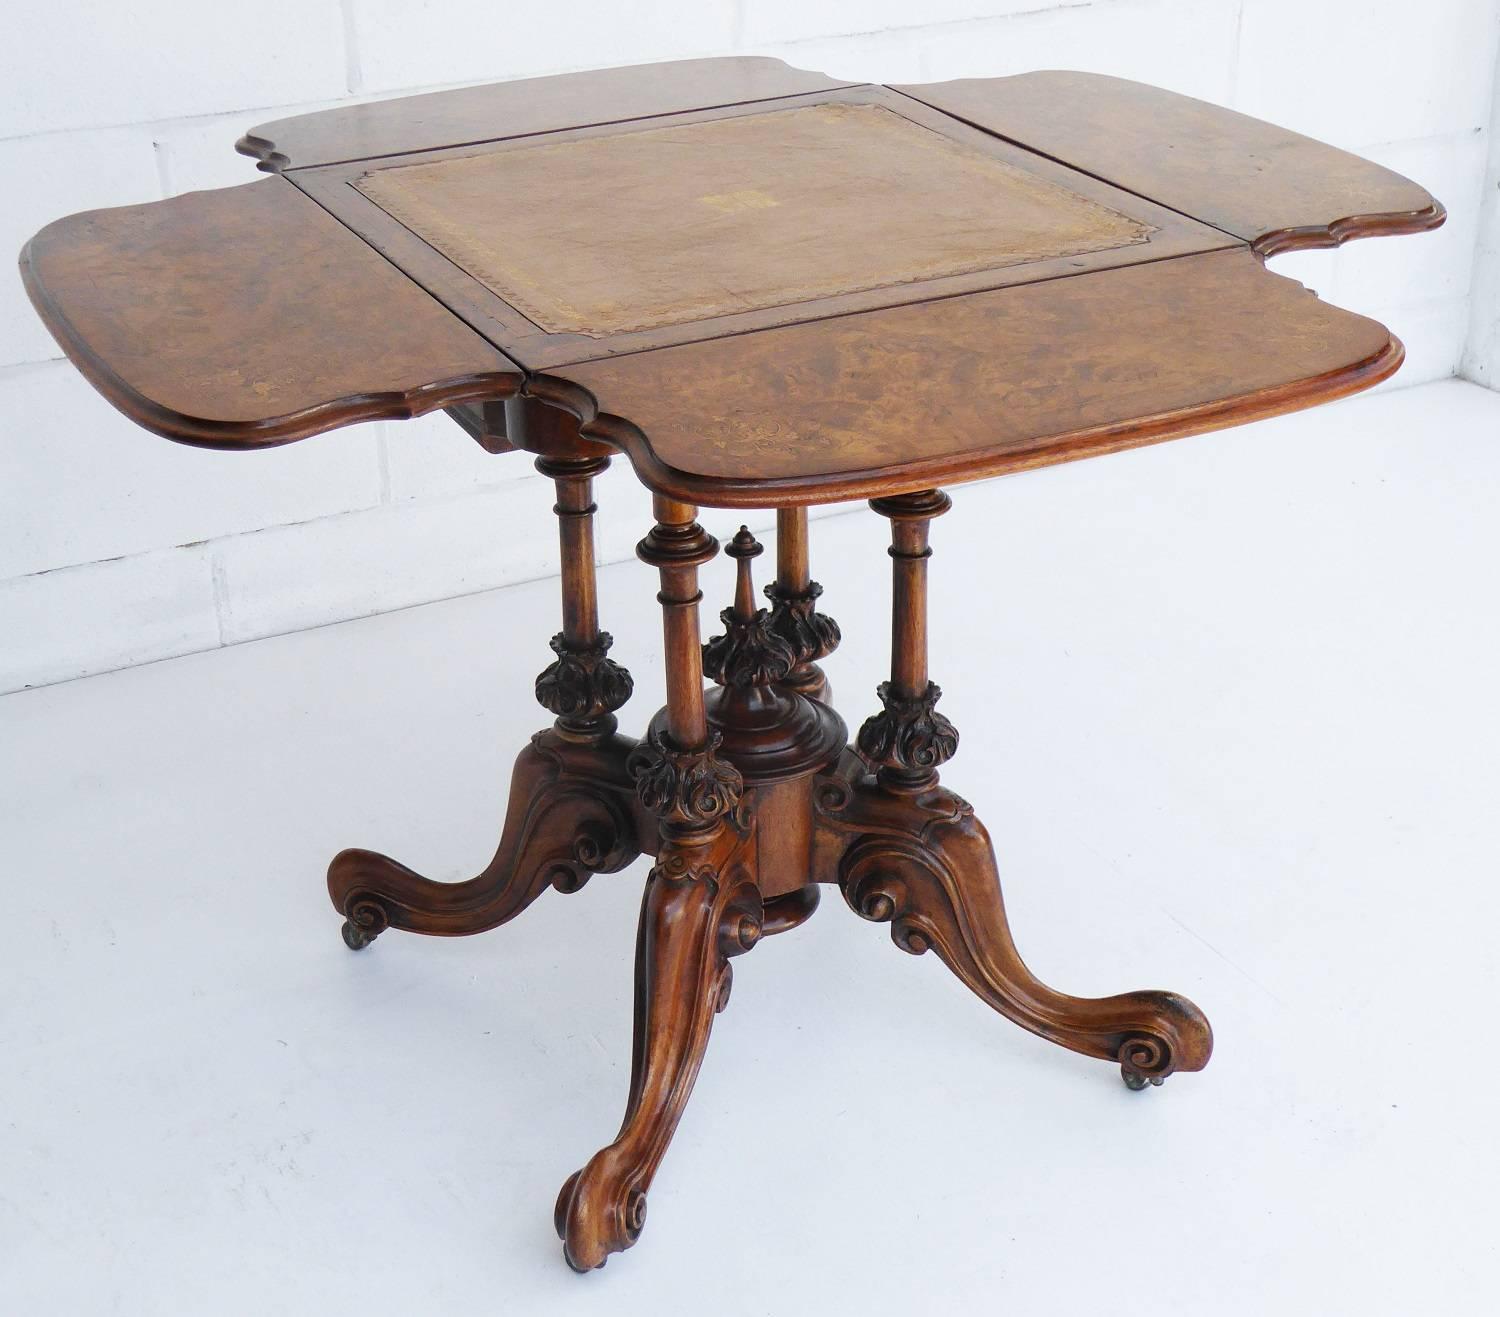 For sale is a fine quality Mid-Victorian burr walnut games table. The top of the table has a hazel colored leather, with decorative gold tooling and a centre motif. On each side of the table is a drop down flap, each nicely inlaid with floral